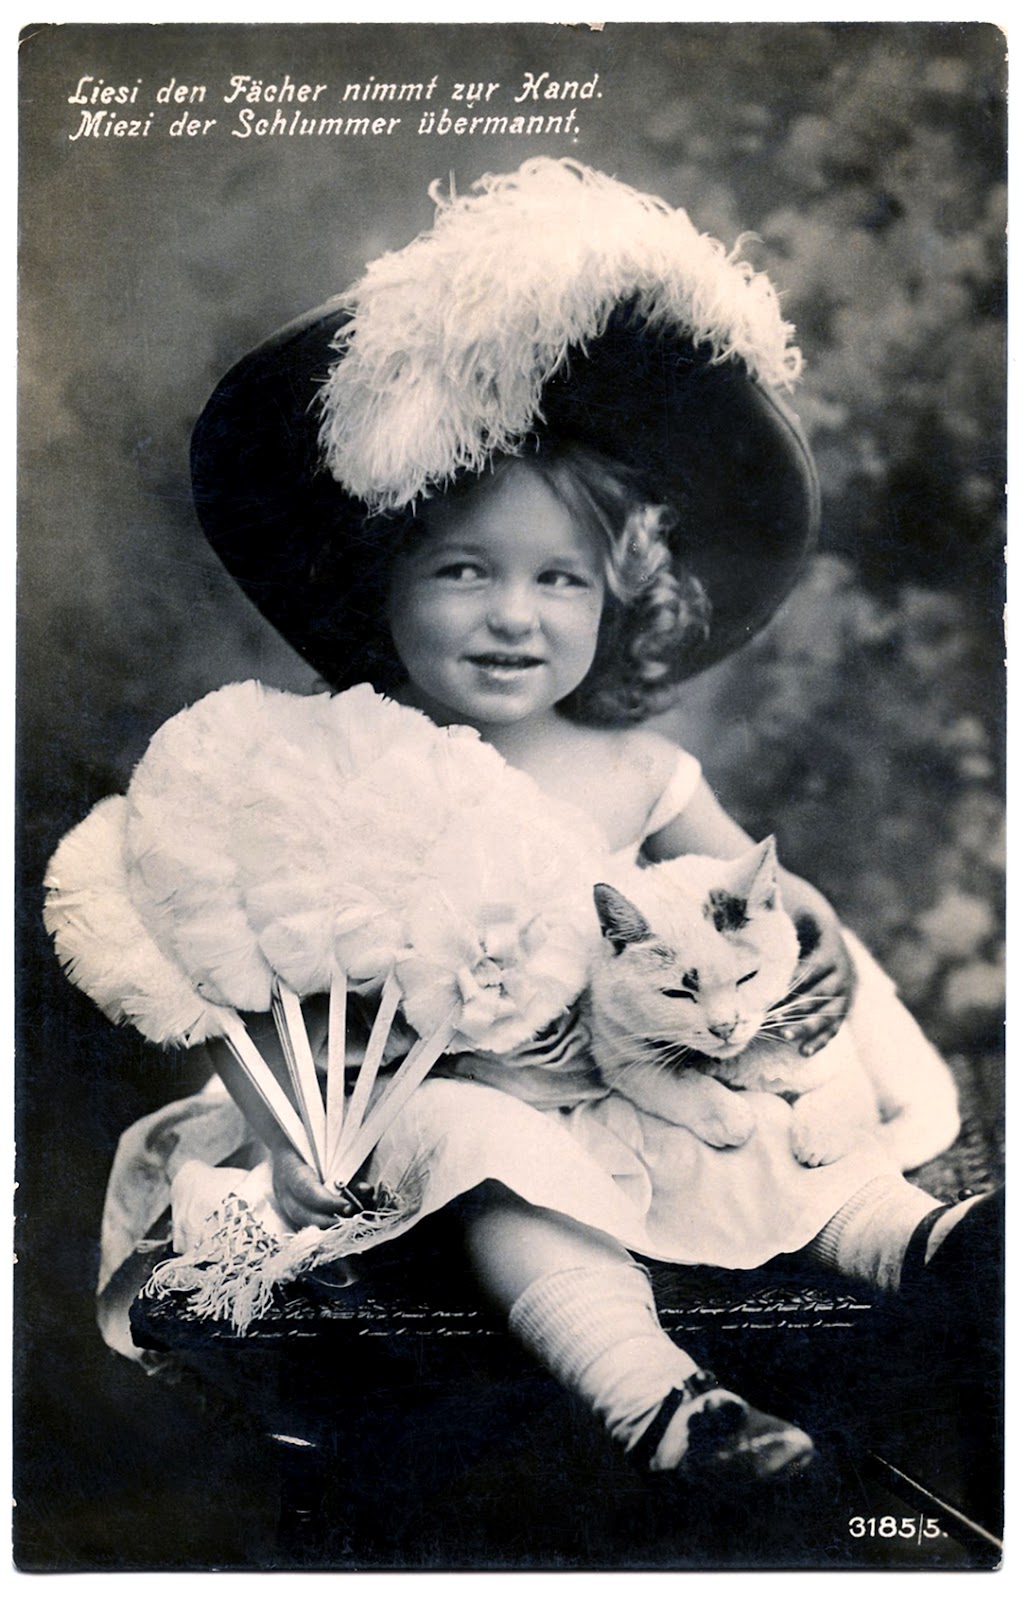 Old Photo - Cute Little Girl with Big Hat & Cat - The Graphics Fairy